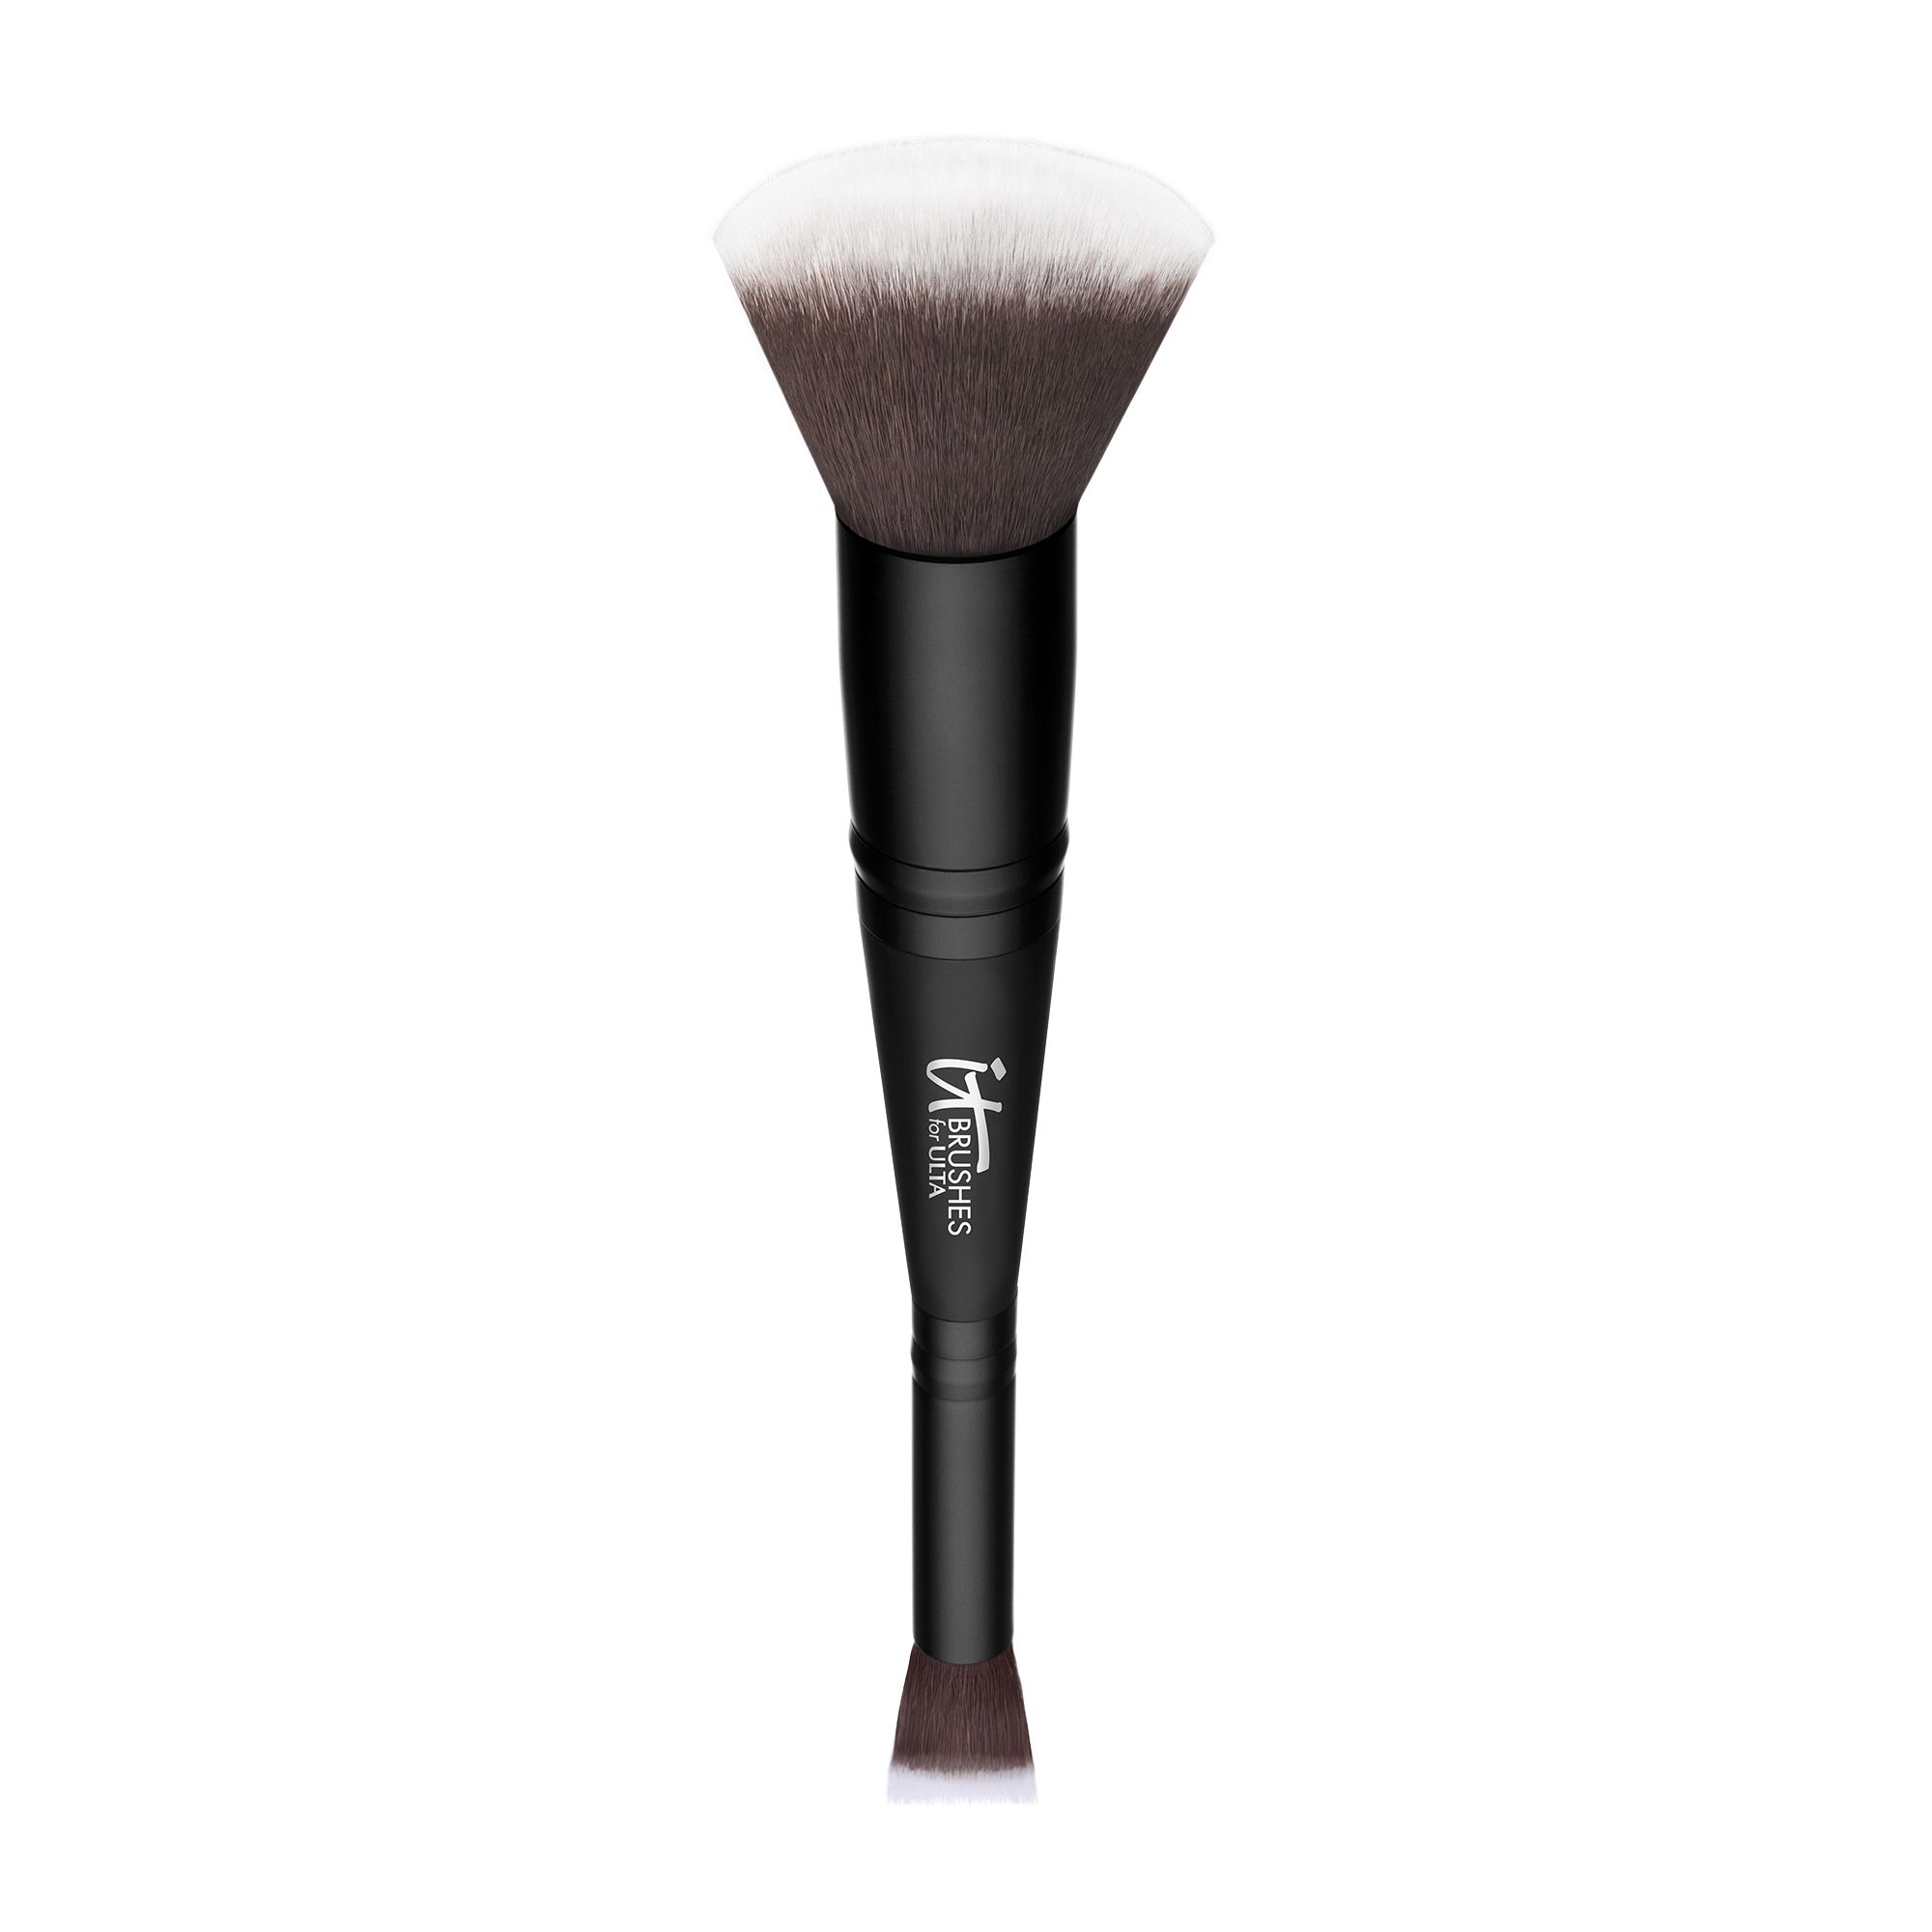 Airbrush Concealer and Foundation Brush #132 - IT Cosmetics | IT Cosmetics (US)